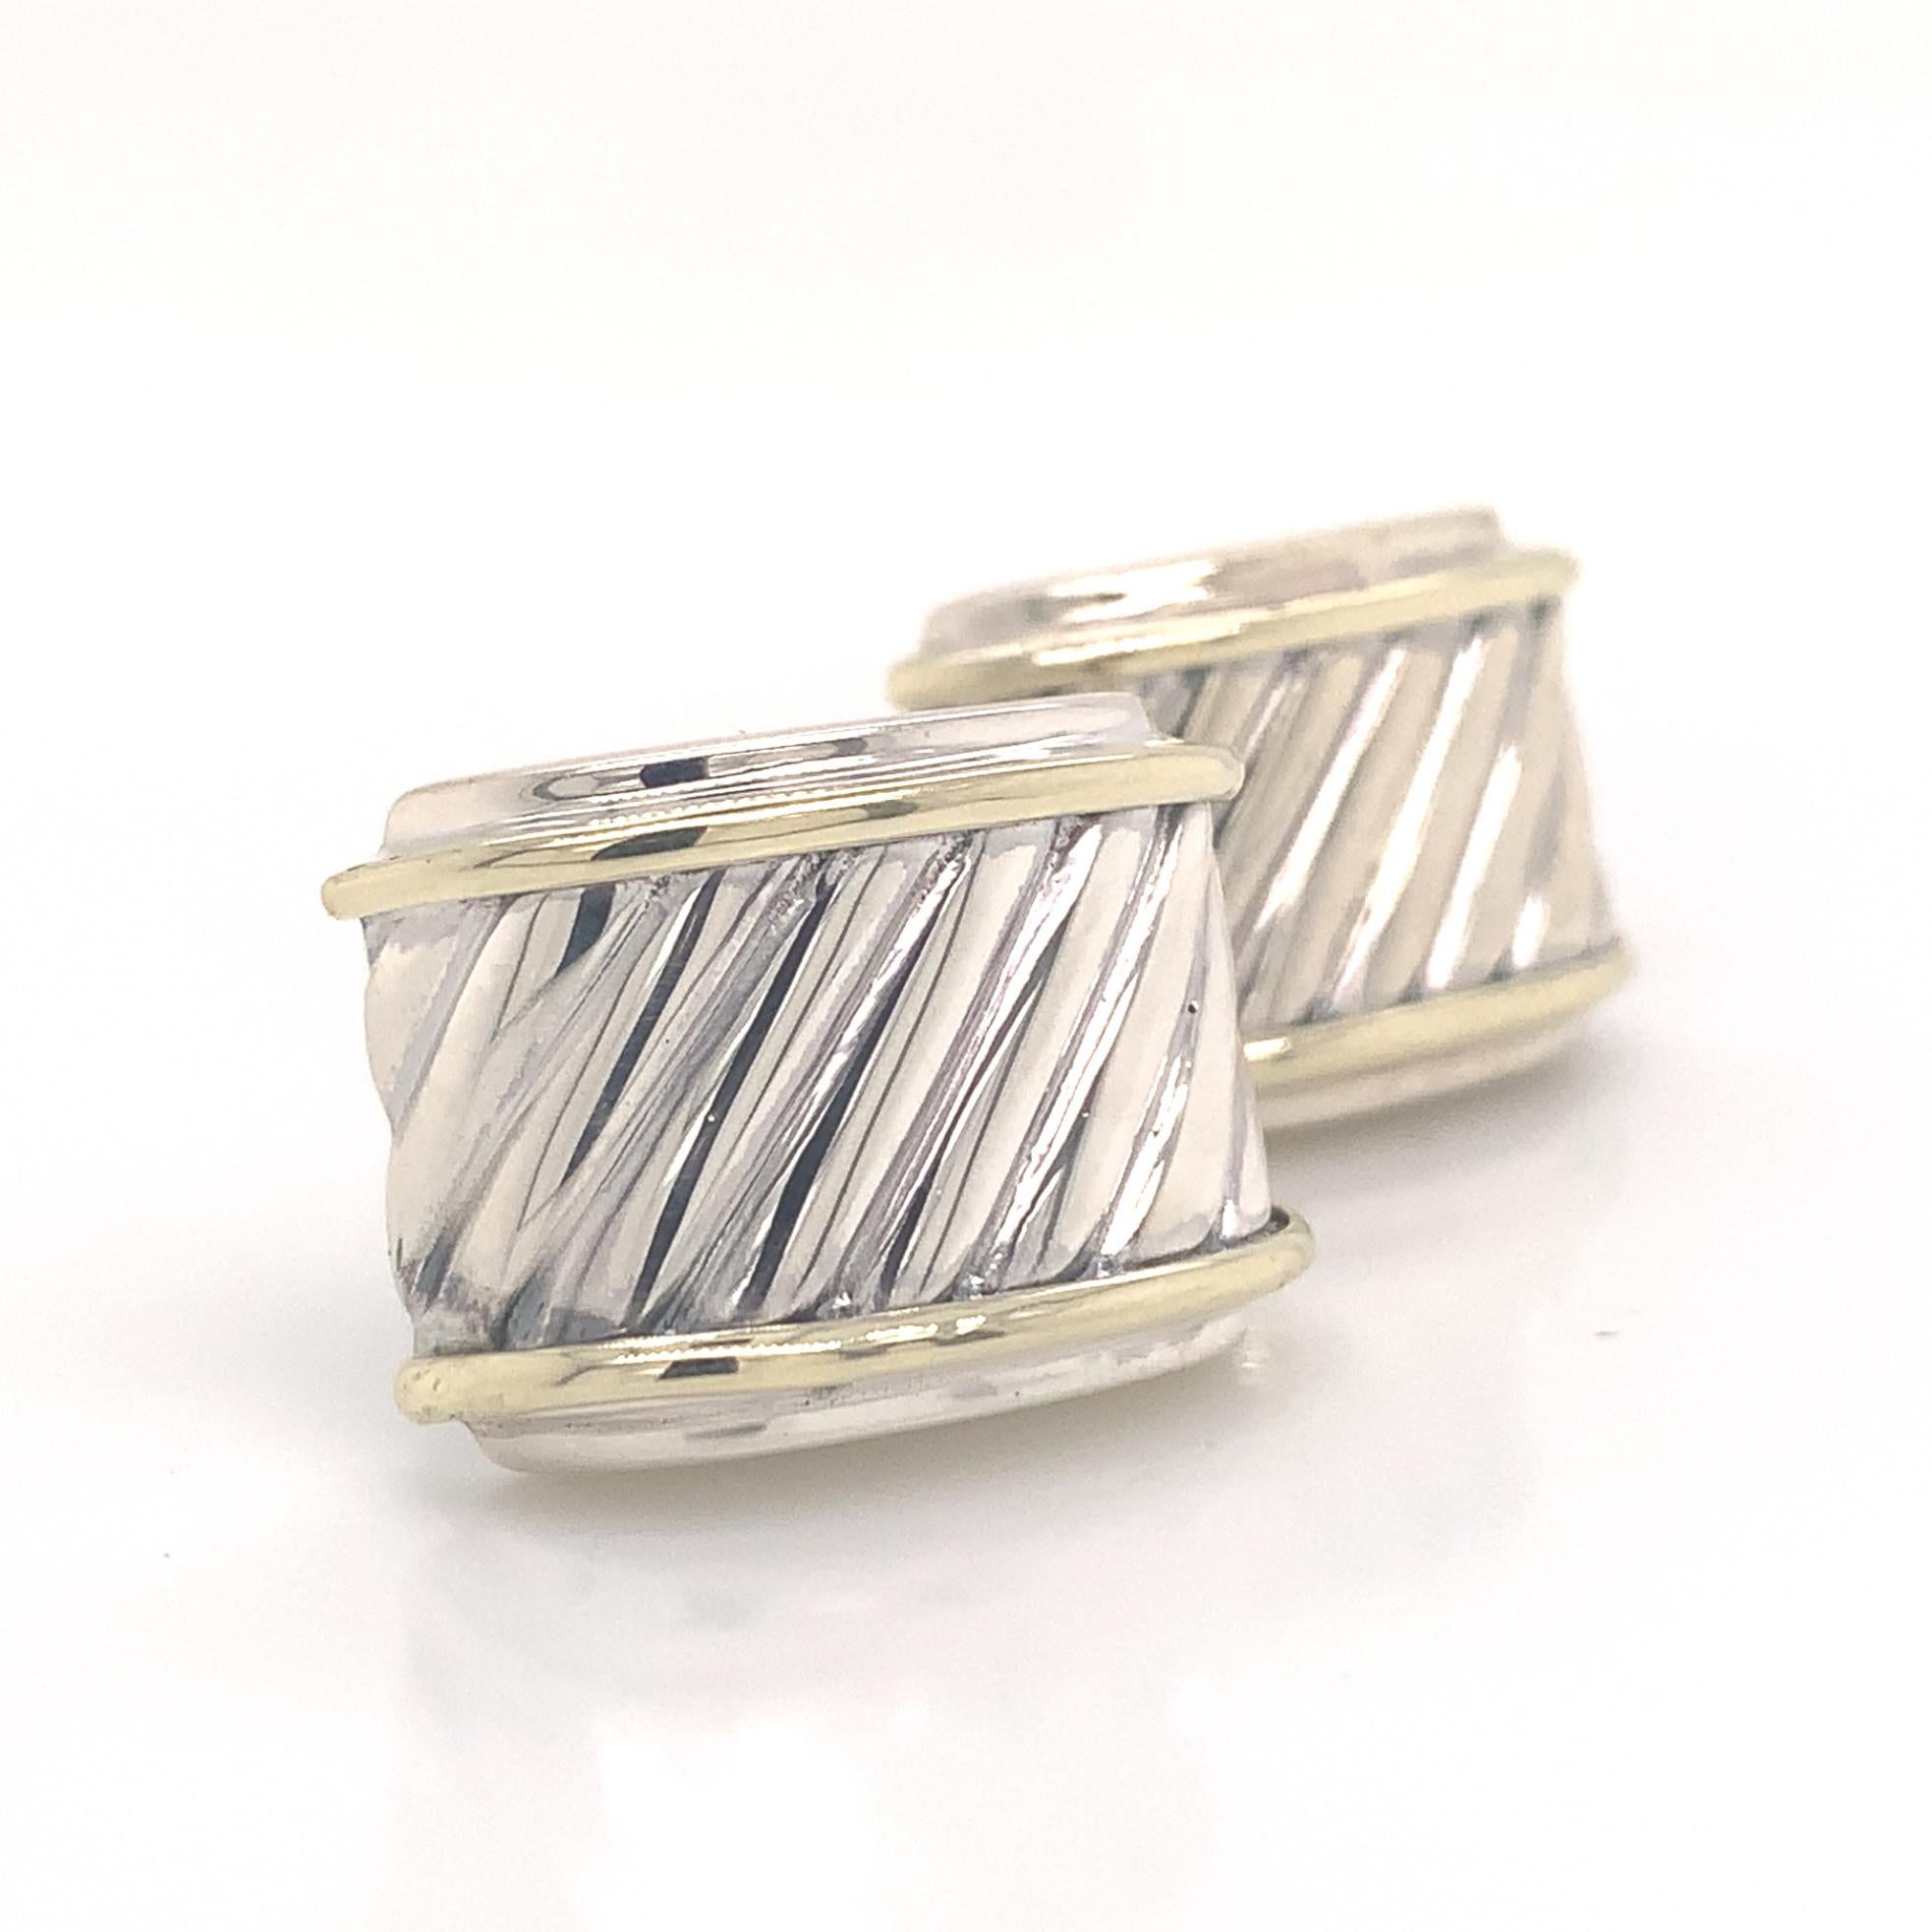 David Yurman Estate Cufflinks Sterling Silver 14k Gold 13.3 Grams DY2

TRUSTED SELLER SINCE 2002

PLEASE SEE OUR HUNDREDS OF POSITIVE FEEDBACKS FROM OUR CLIENTS!!

FREE SHIPPING

This elegant Authentic David Yurman Men's sterling silver and 14k gold